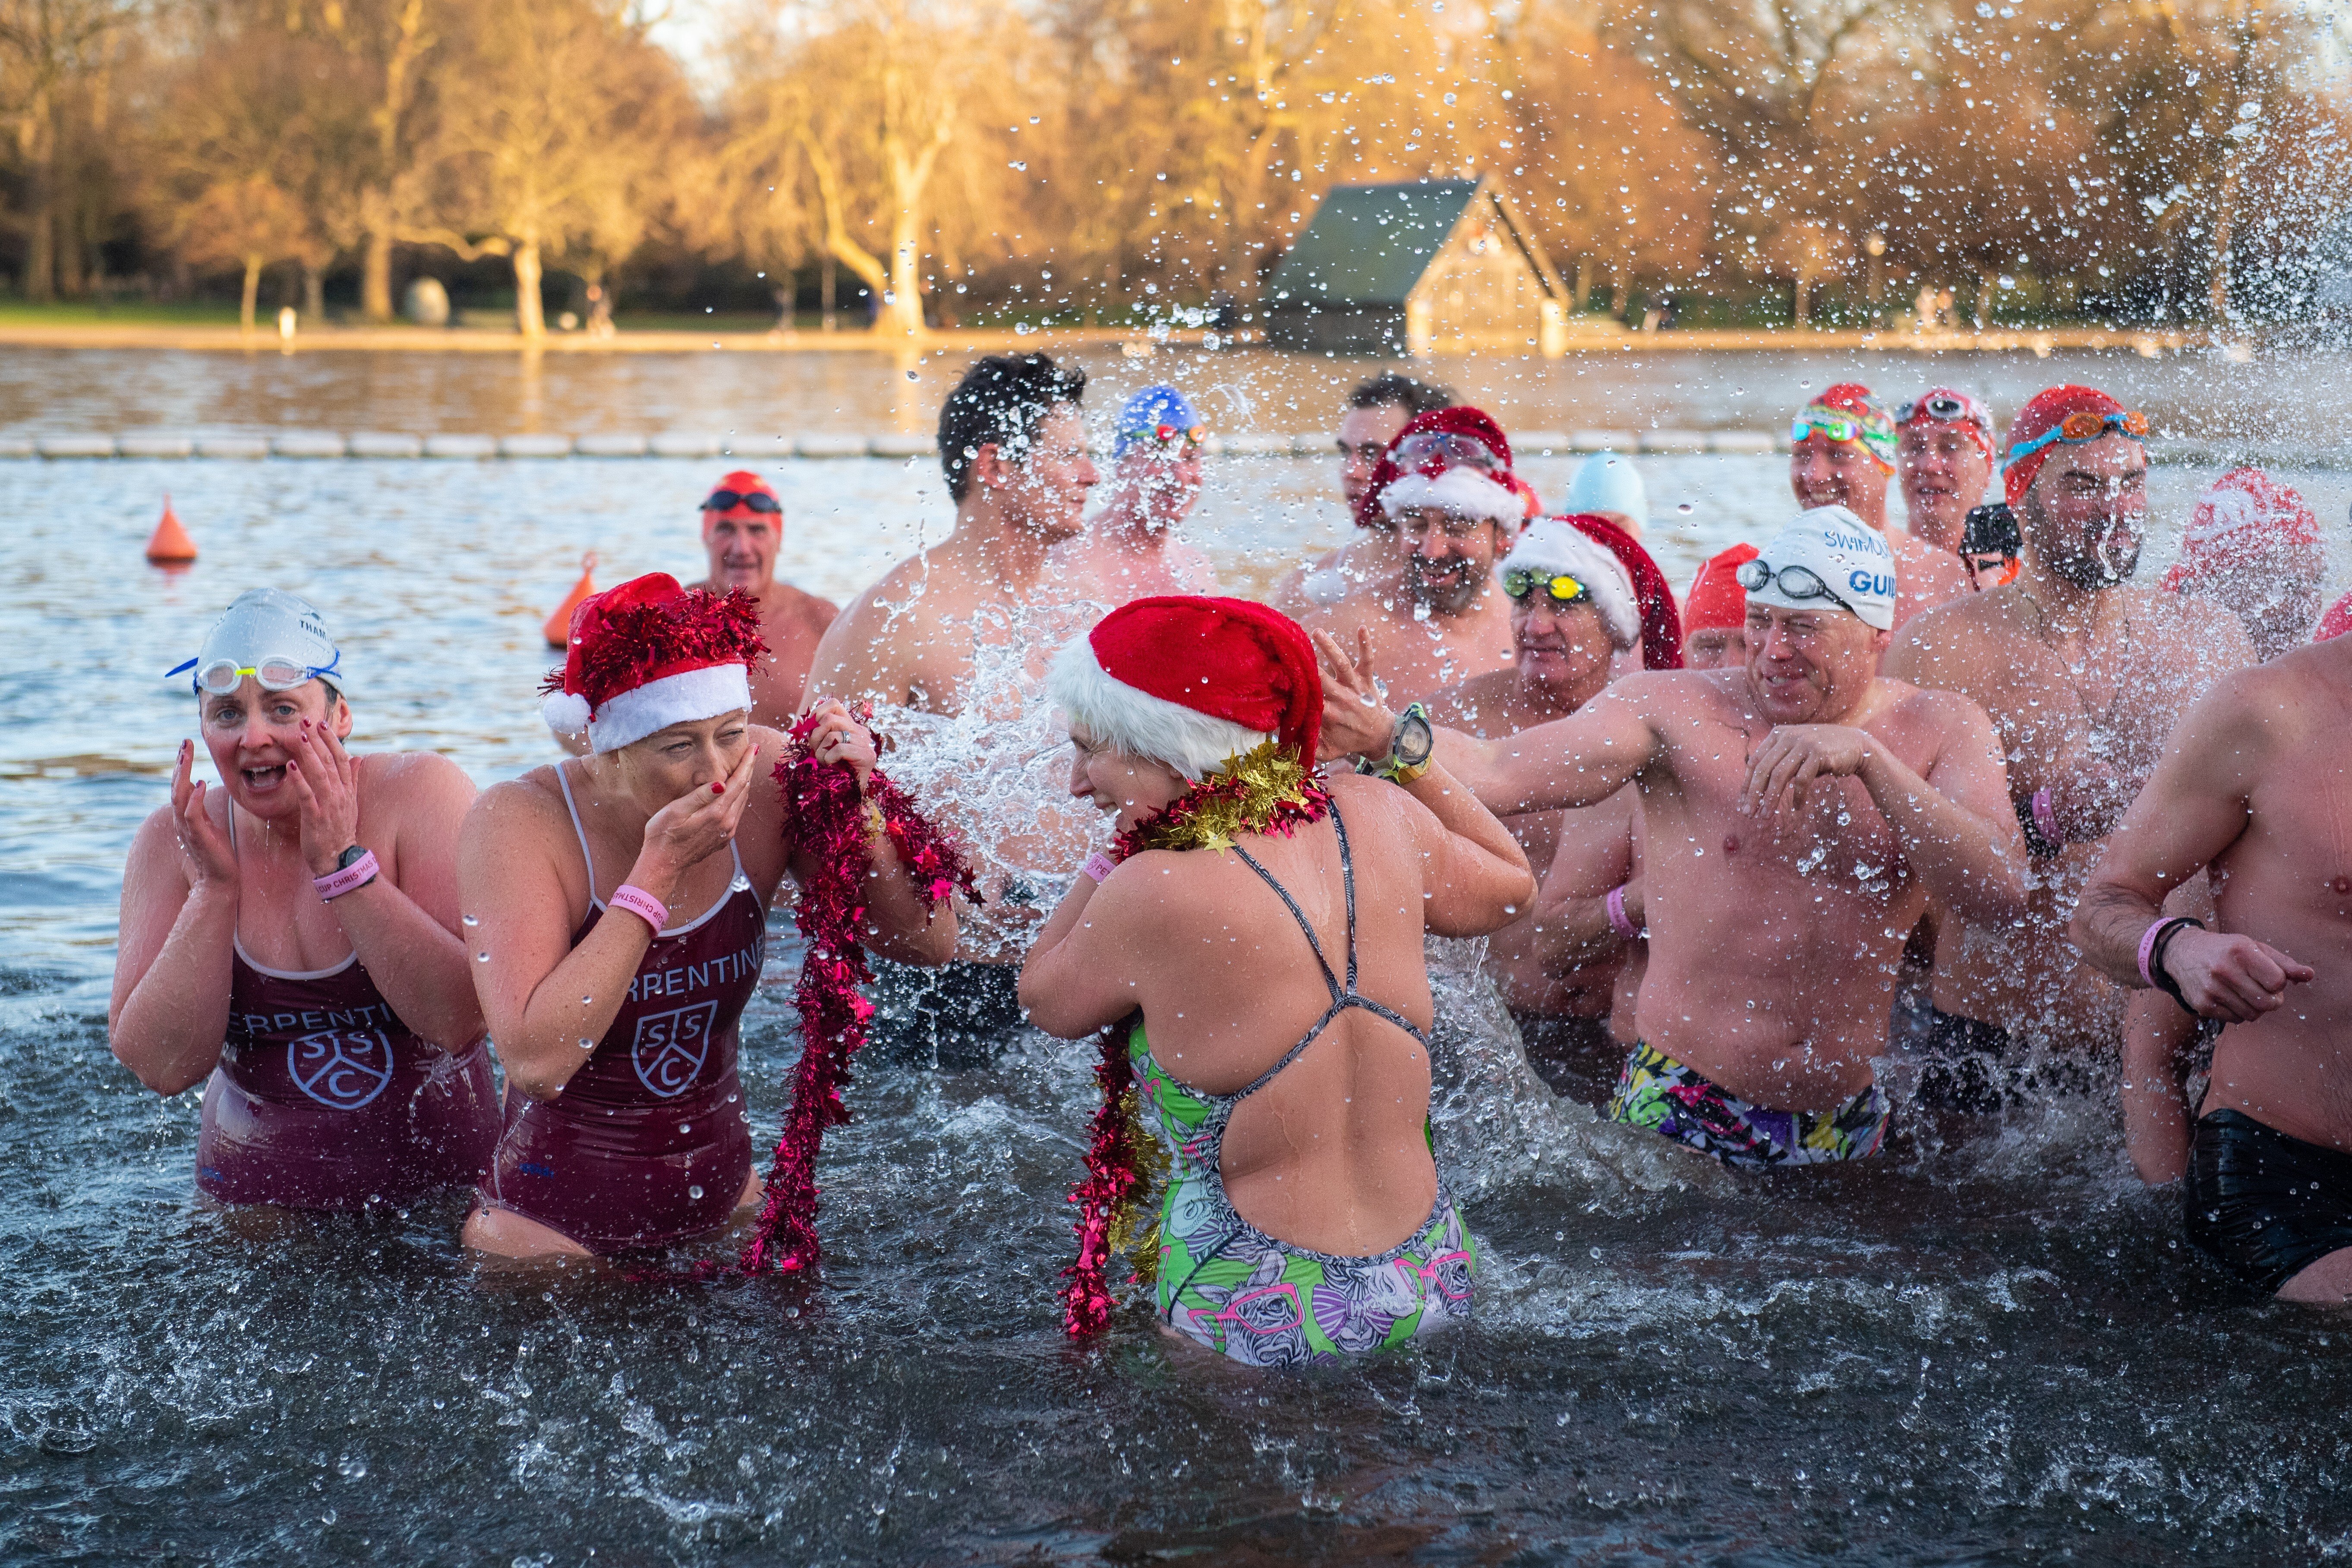 Swimmers at London‘s Serpentine lake on Christmas Day 2019. Photo: Getty Images